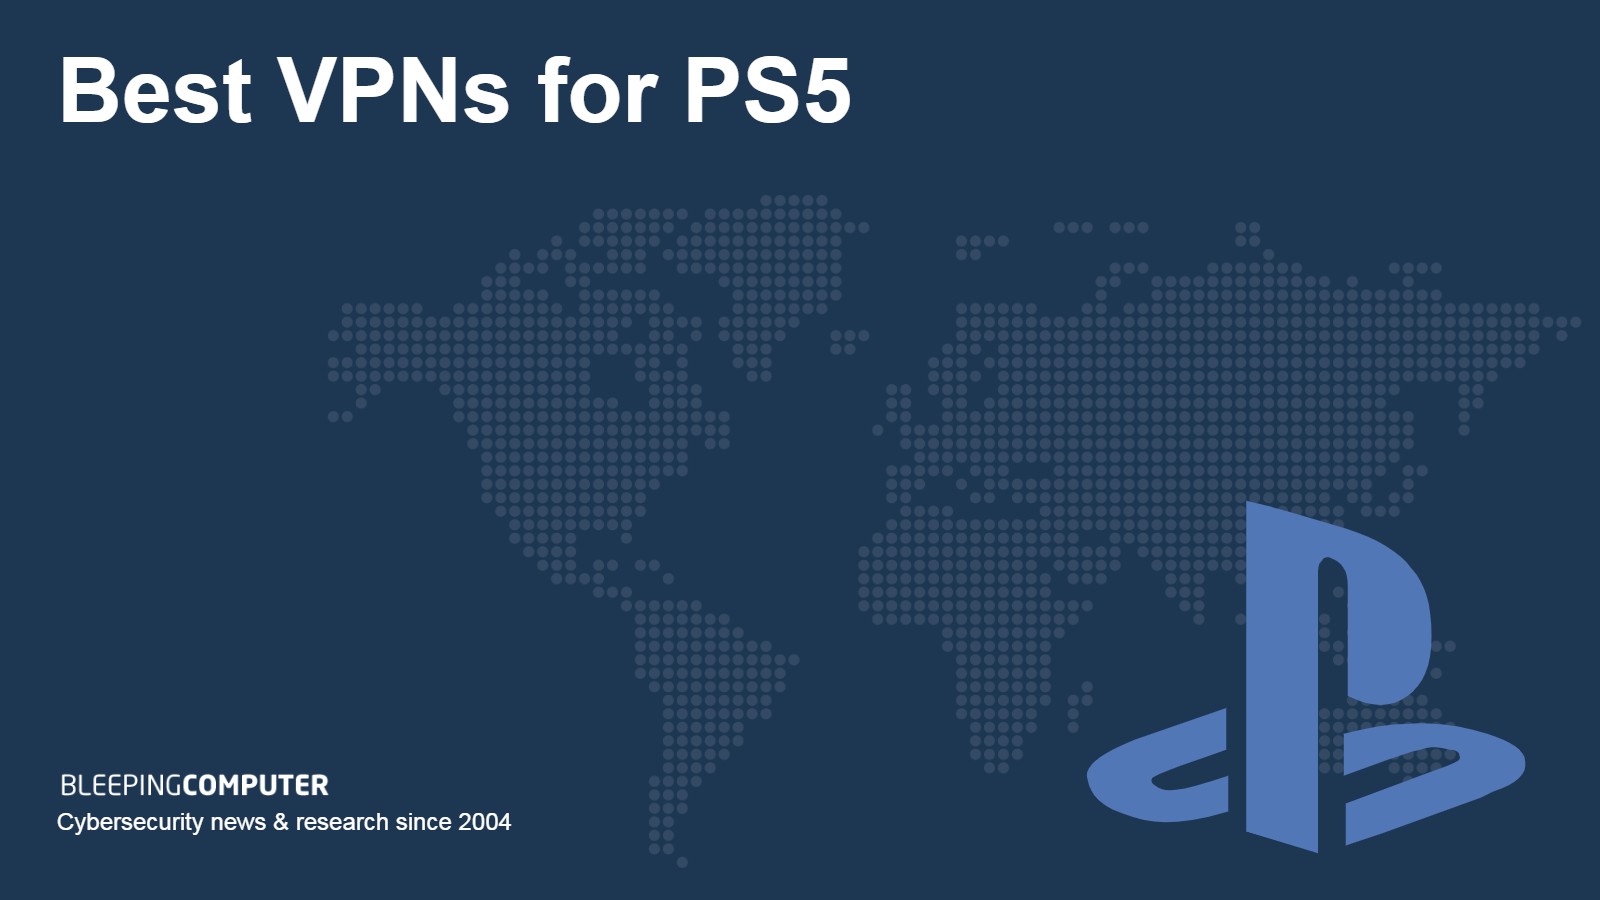 Best VPNs for PS5